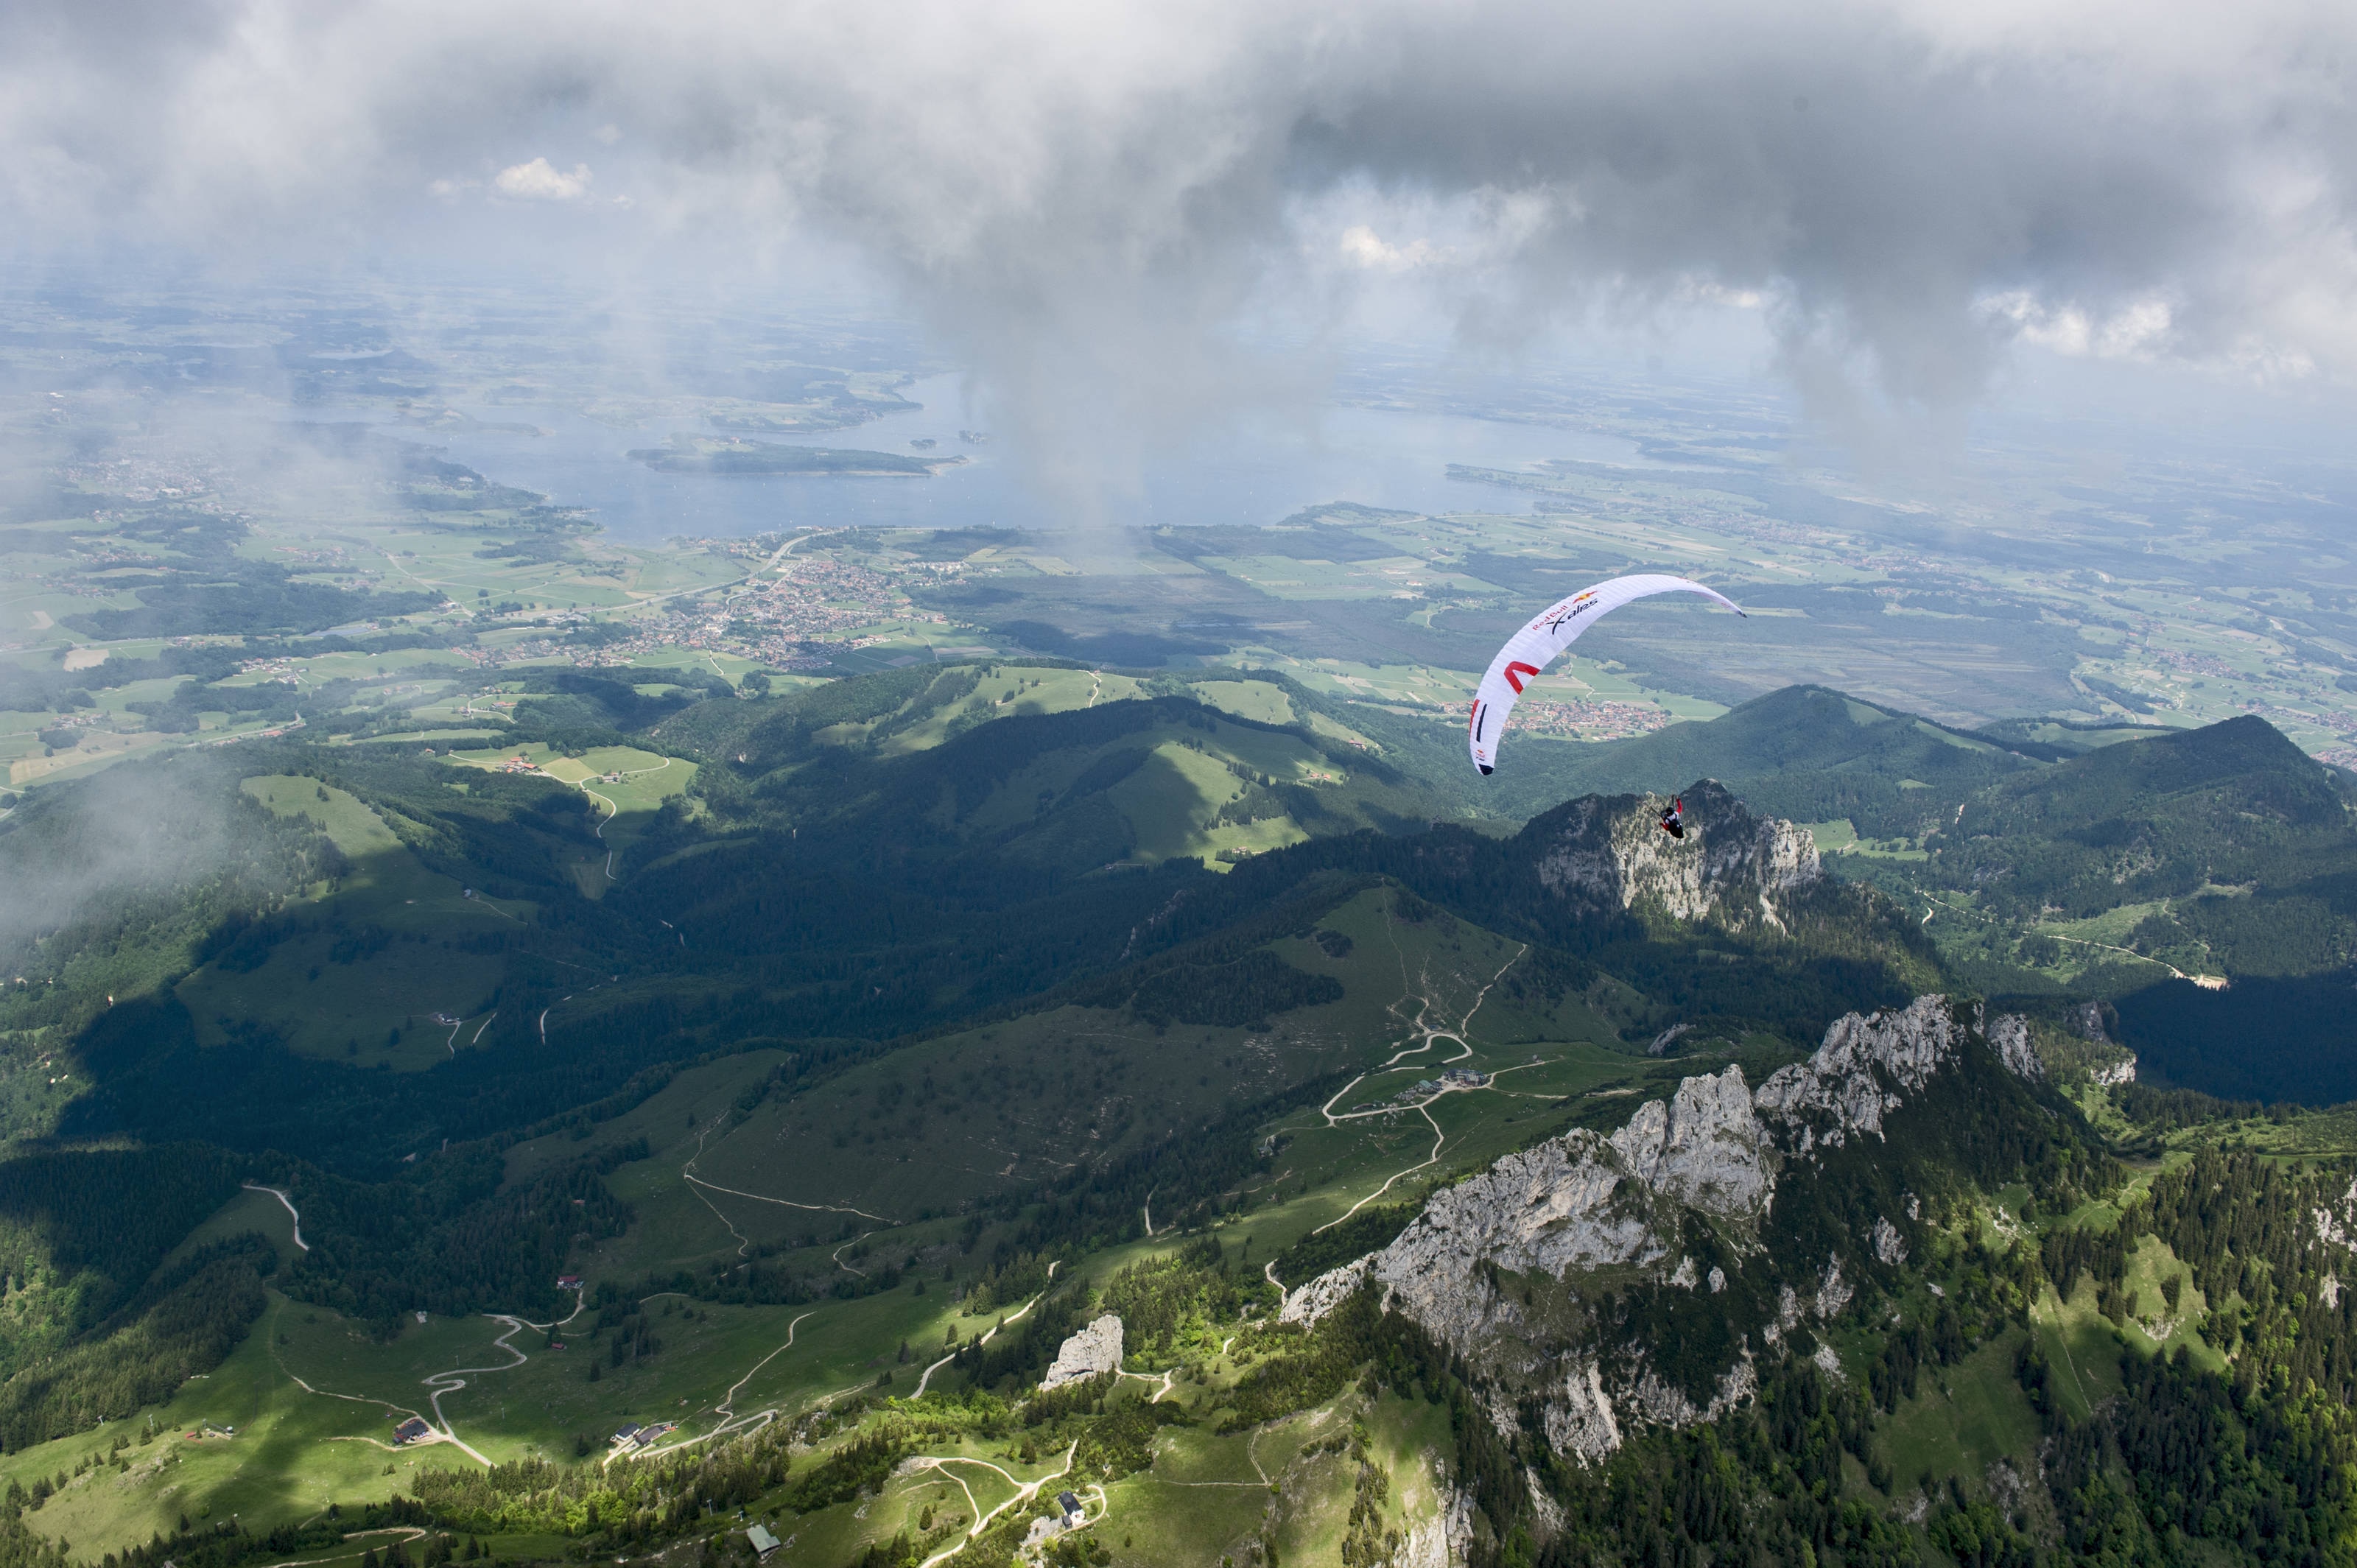 Participant flies during the Red Bull X-Alps preparations in Aschau, Germany on June 3, 2017 // Felix Woelk/Red Bull Content Pool // SI201707070631 // Usage for editorial use only //